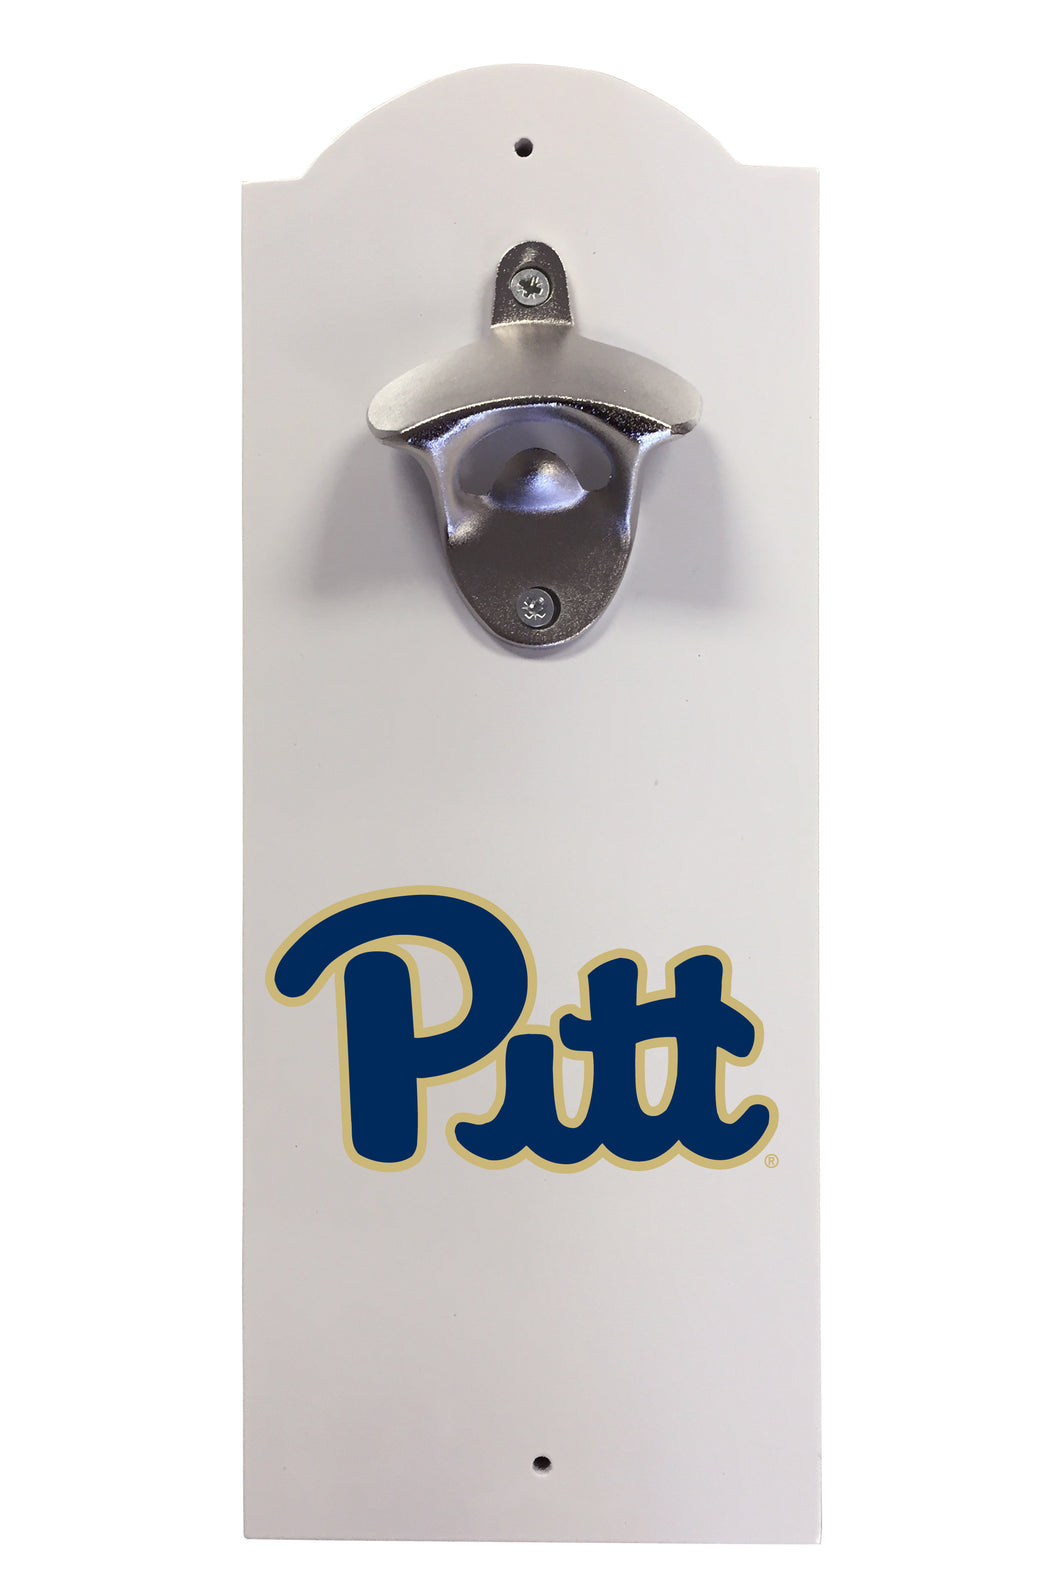 Pittsburgh Panthers Wall-Mounted Bottle Opener – Sturdy Metal with Decorative Wood Base for Home Bars, Rec Rooms & Fan Caves